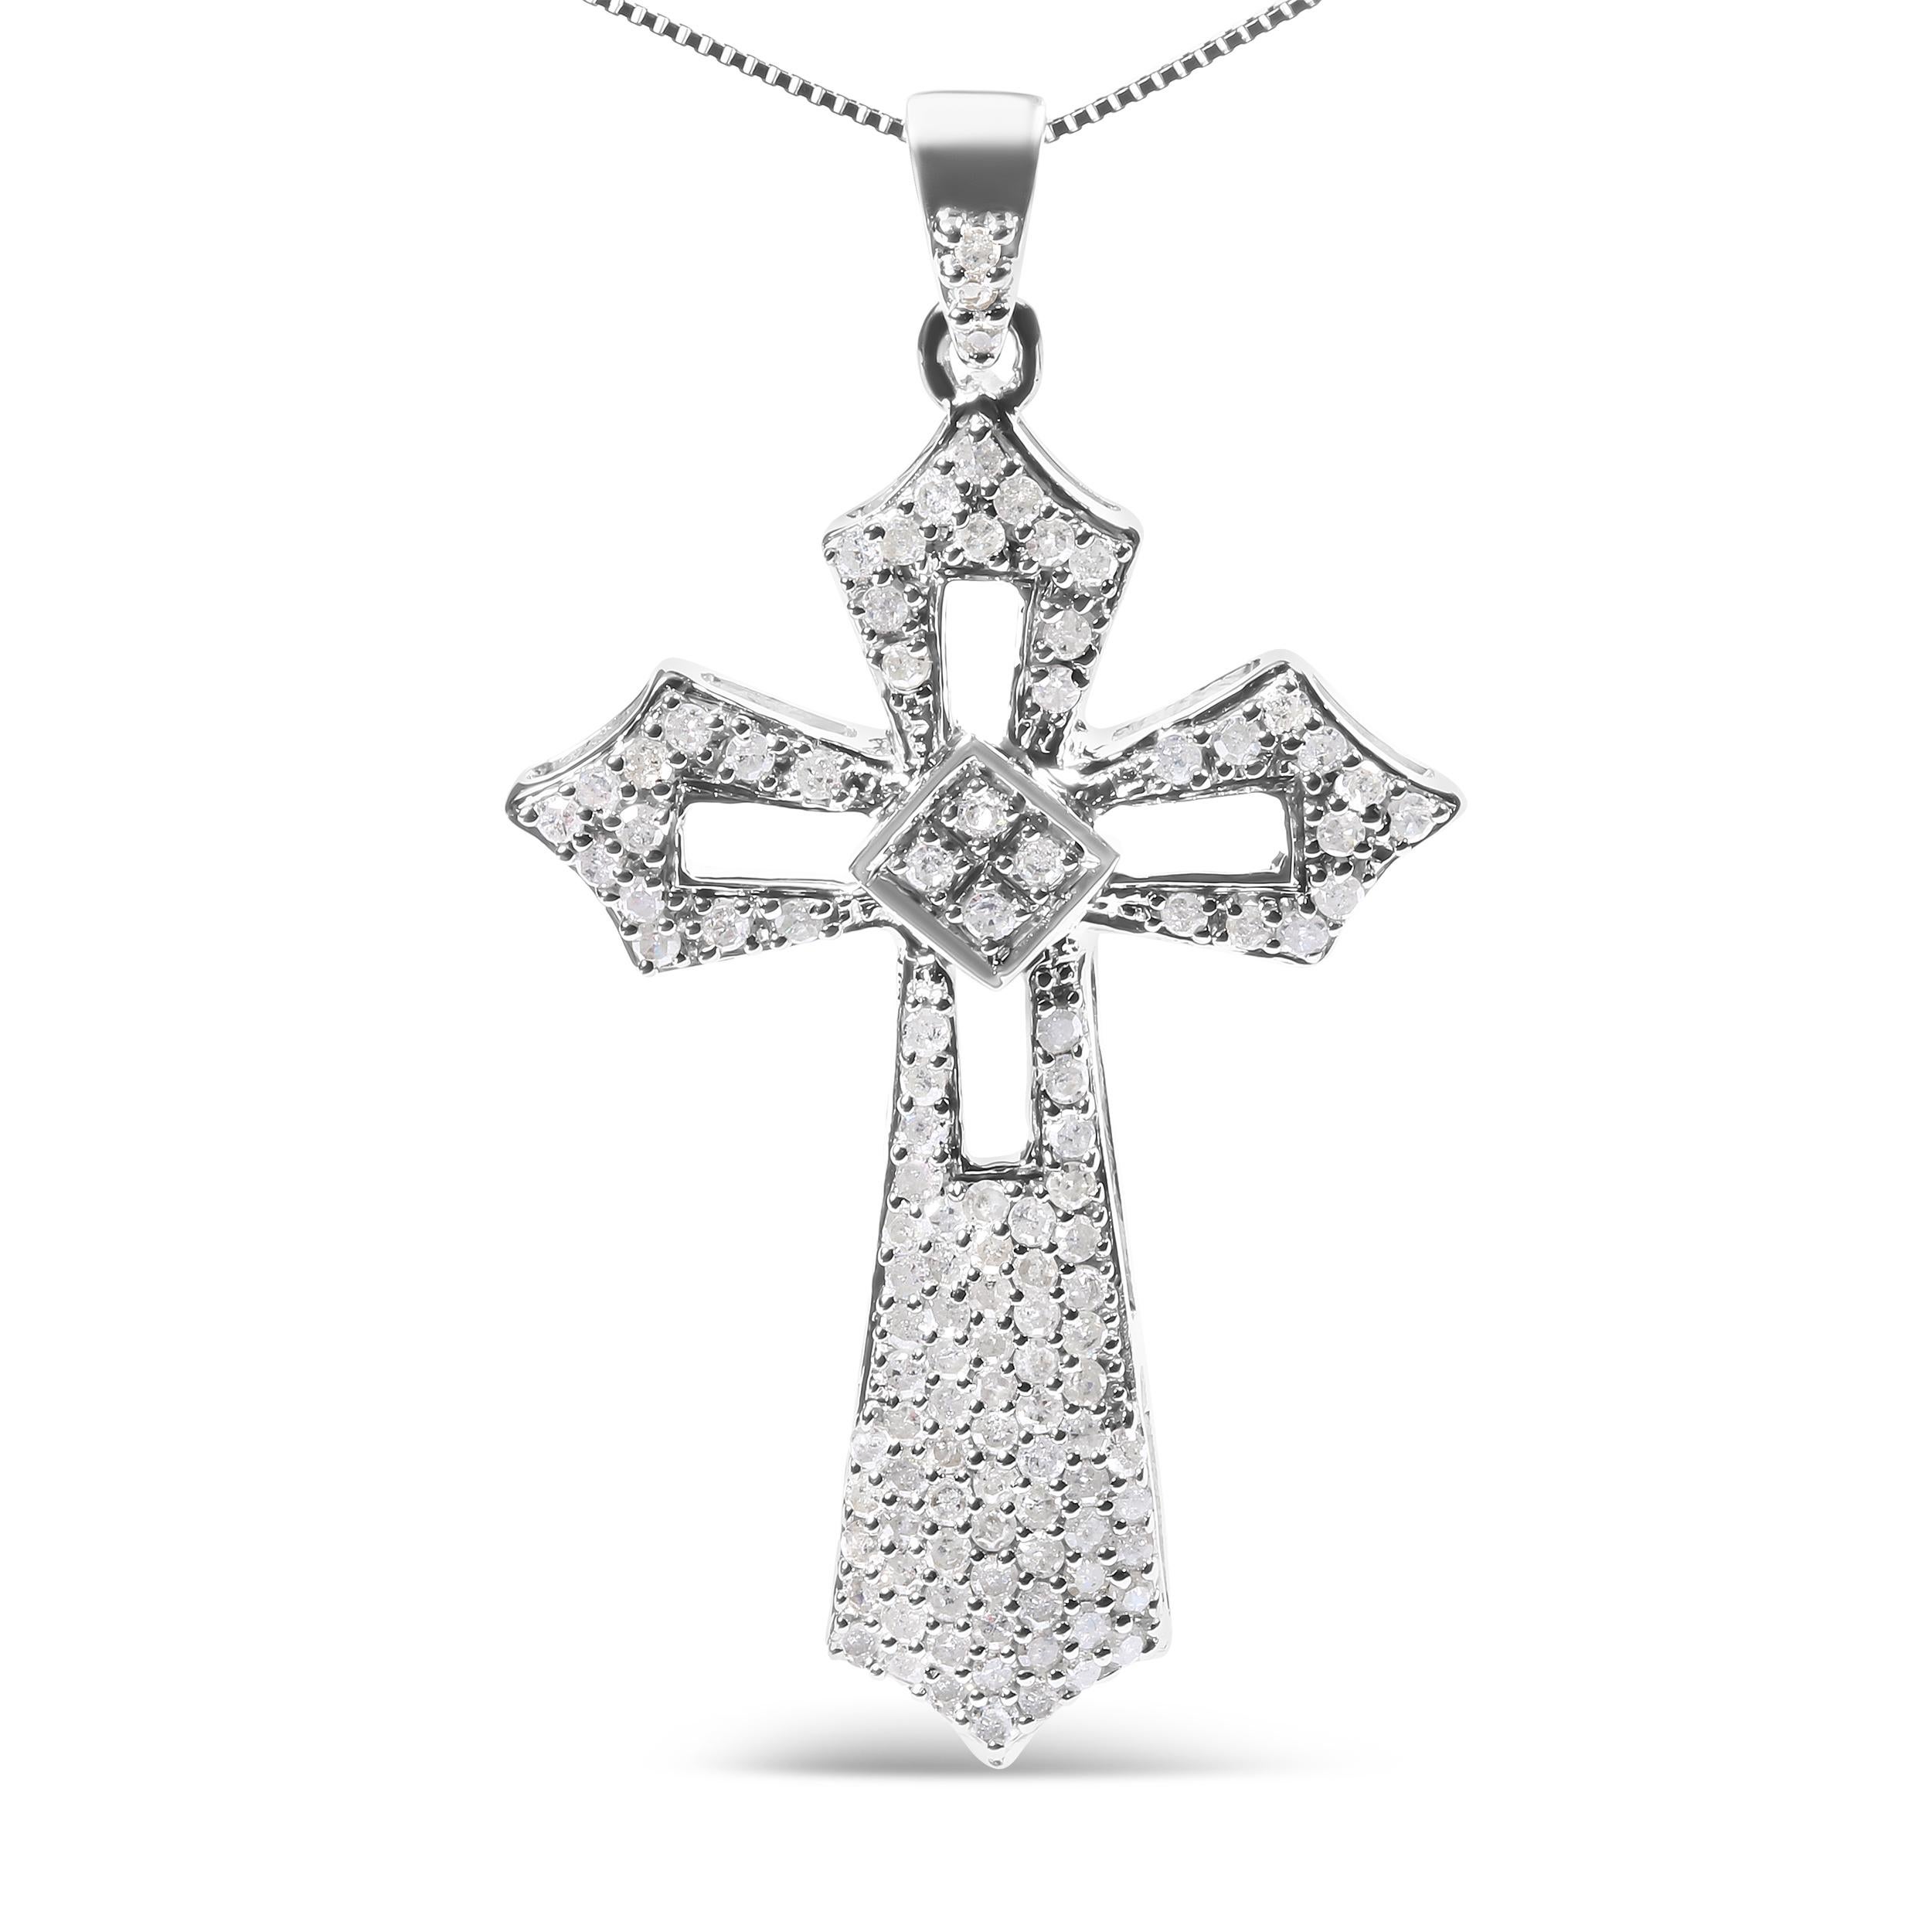 Elevate your style with a touch of glamour and timeless elegance. This stunning pendant necklace is crafted from premium .925 sterling silver and features a breathtaking diamond-encrusted Fleur De Lis cross design. With 112 sparkling diamonds, each